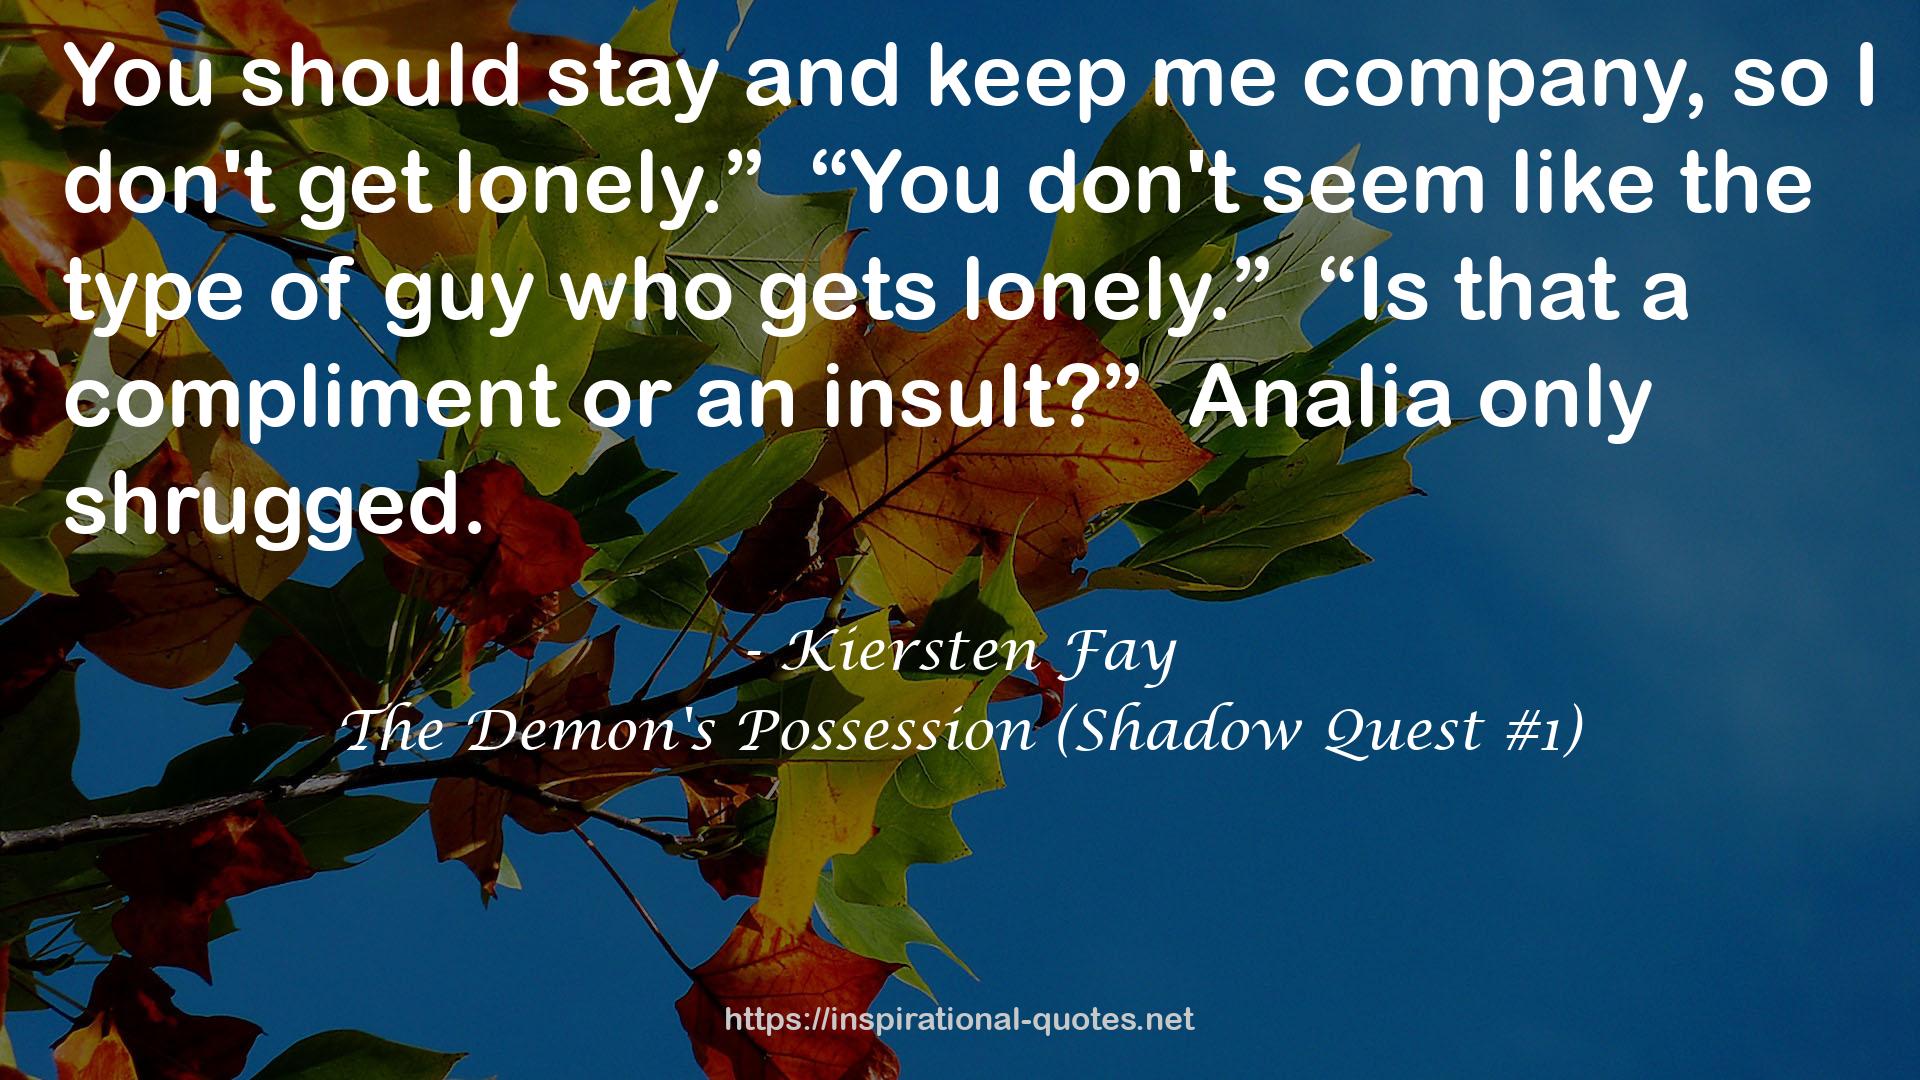 The Demon's Possession (Shadow Quest #1) QUOTES